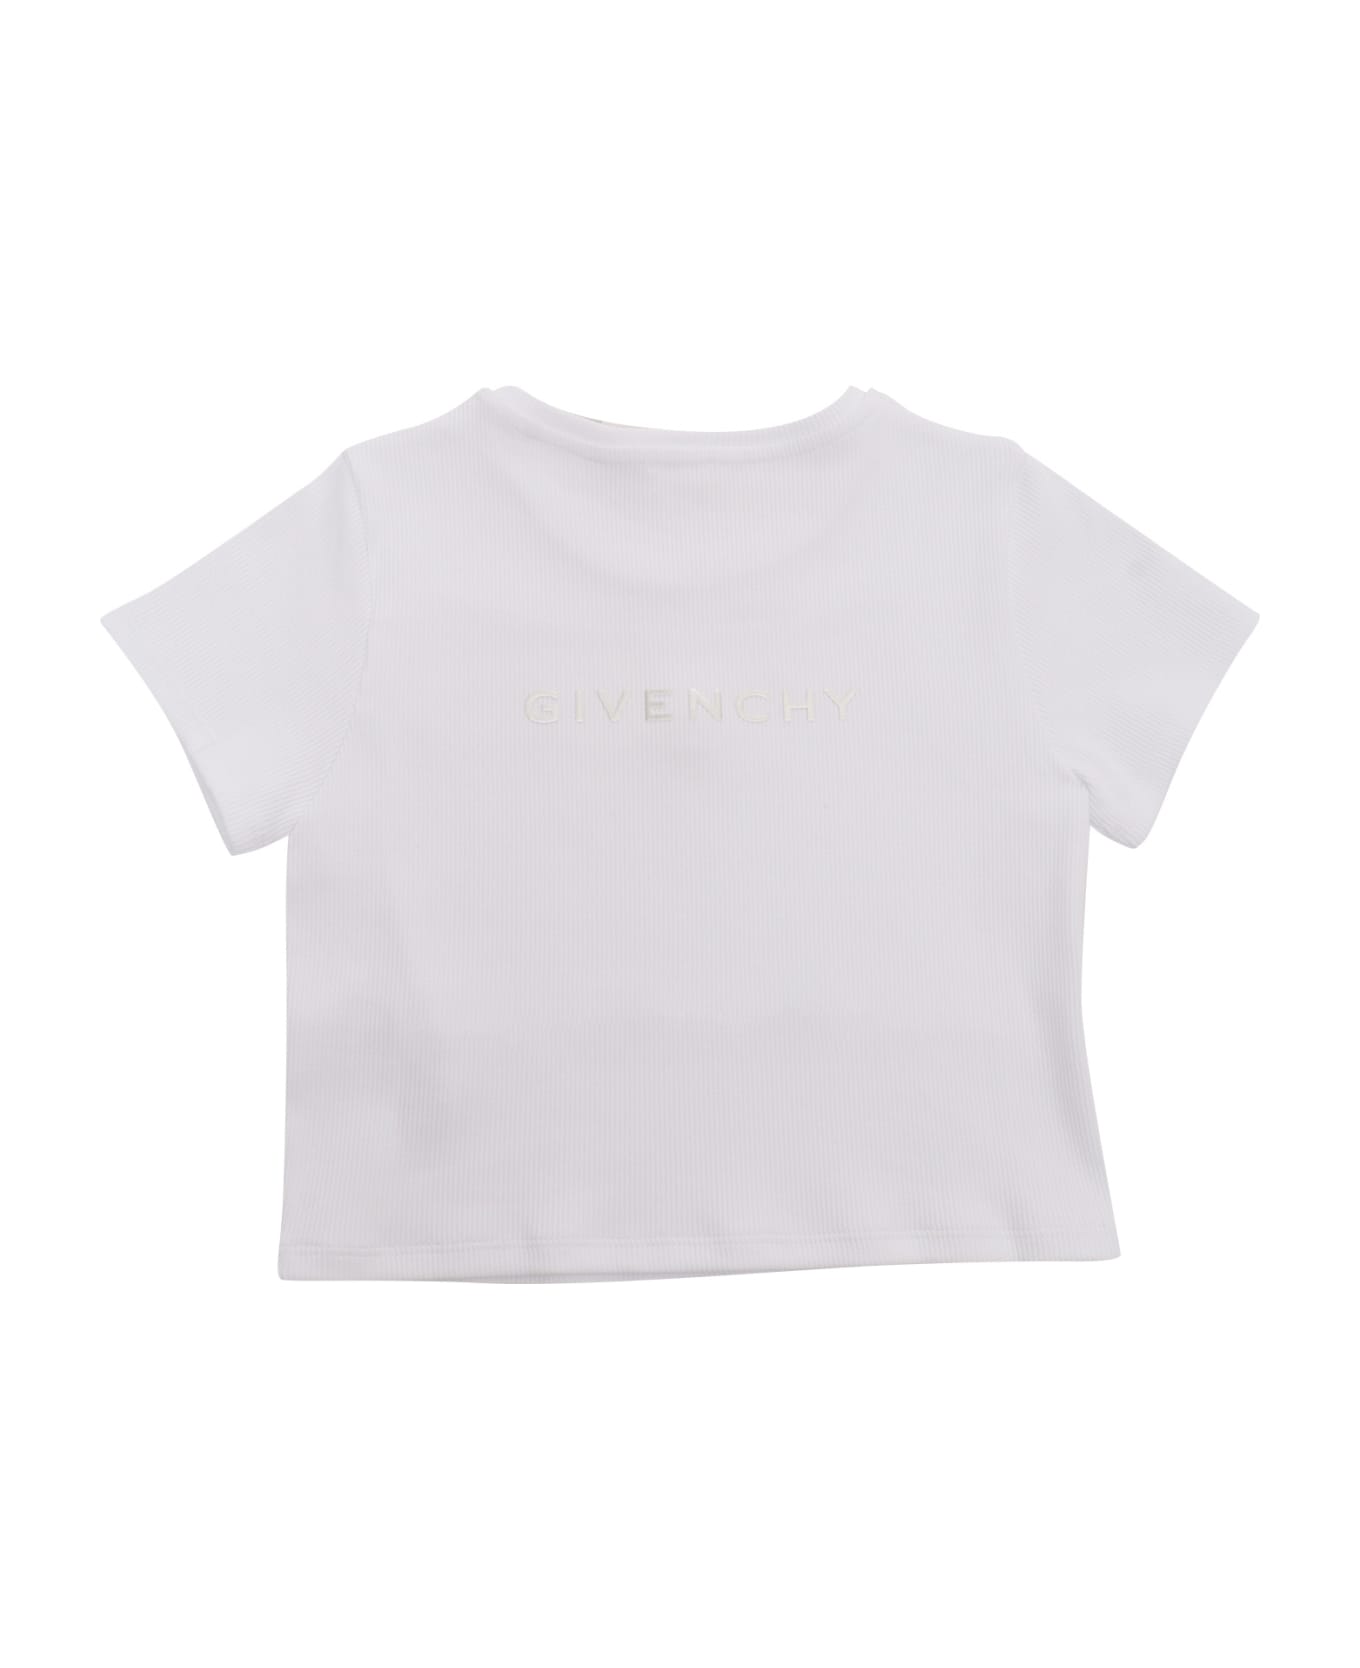 Givenchy White Cropped T-shirt - WHITE